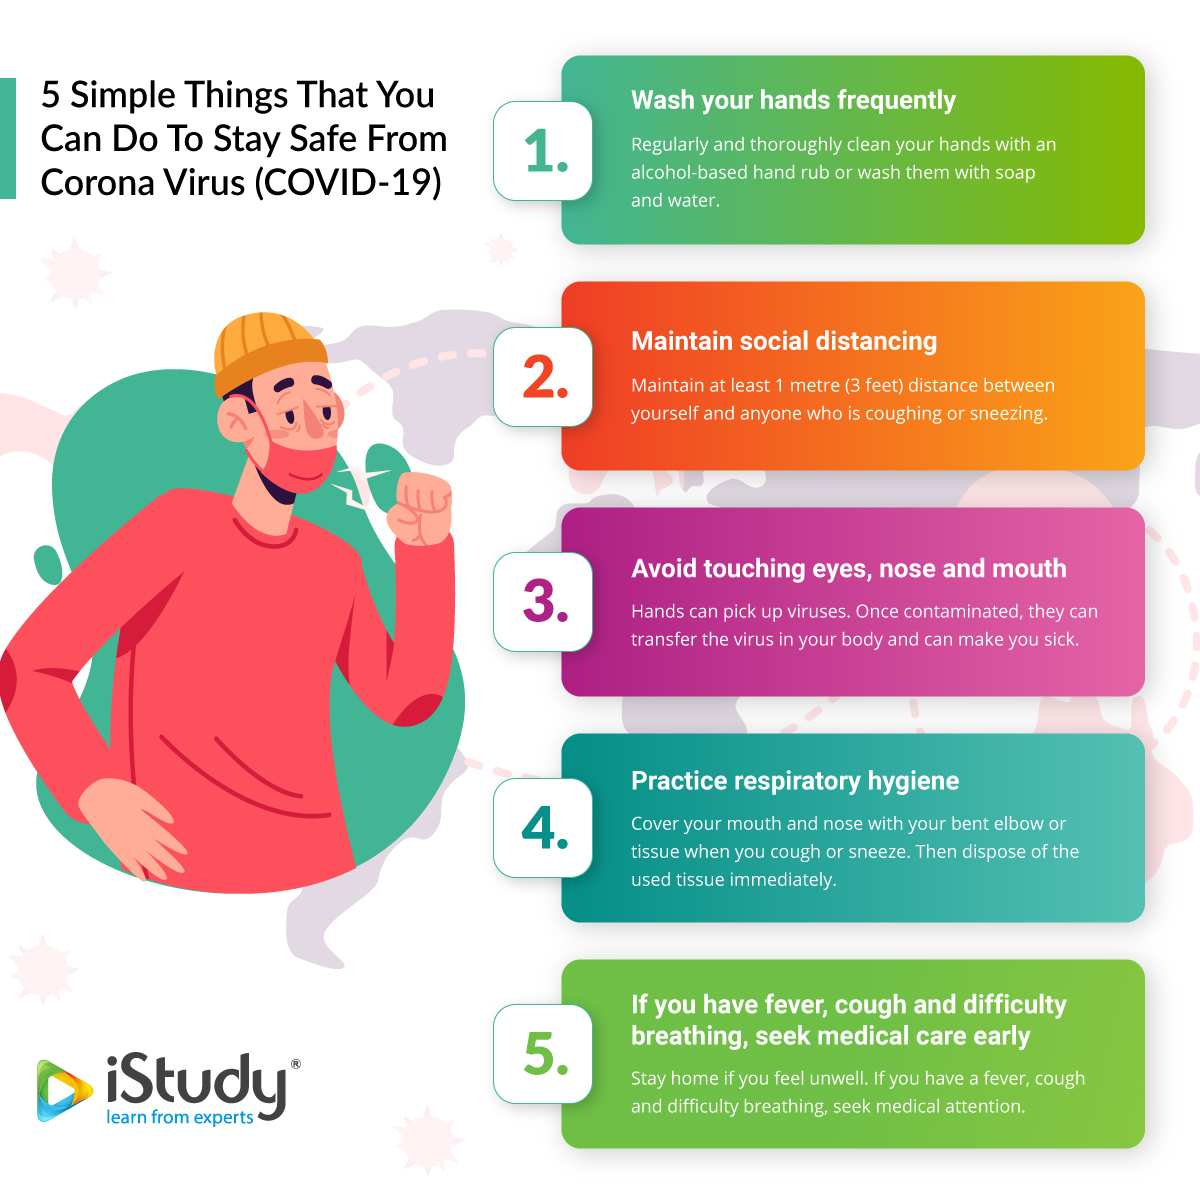 How to Stay Safe from COVID-19